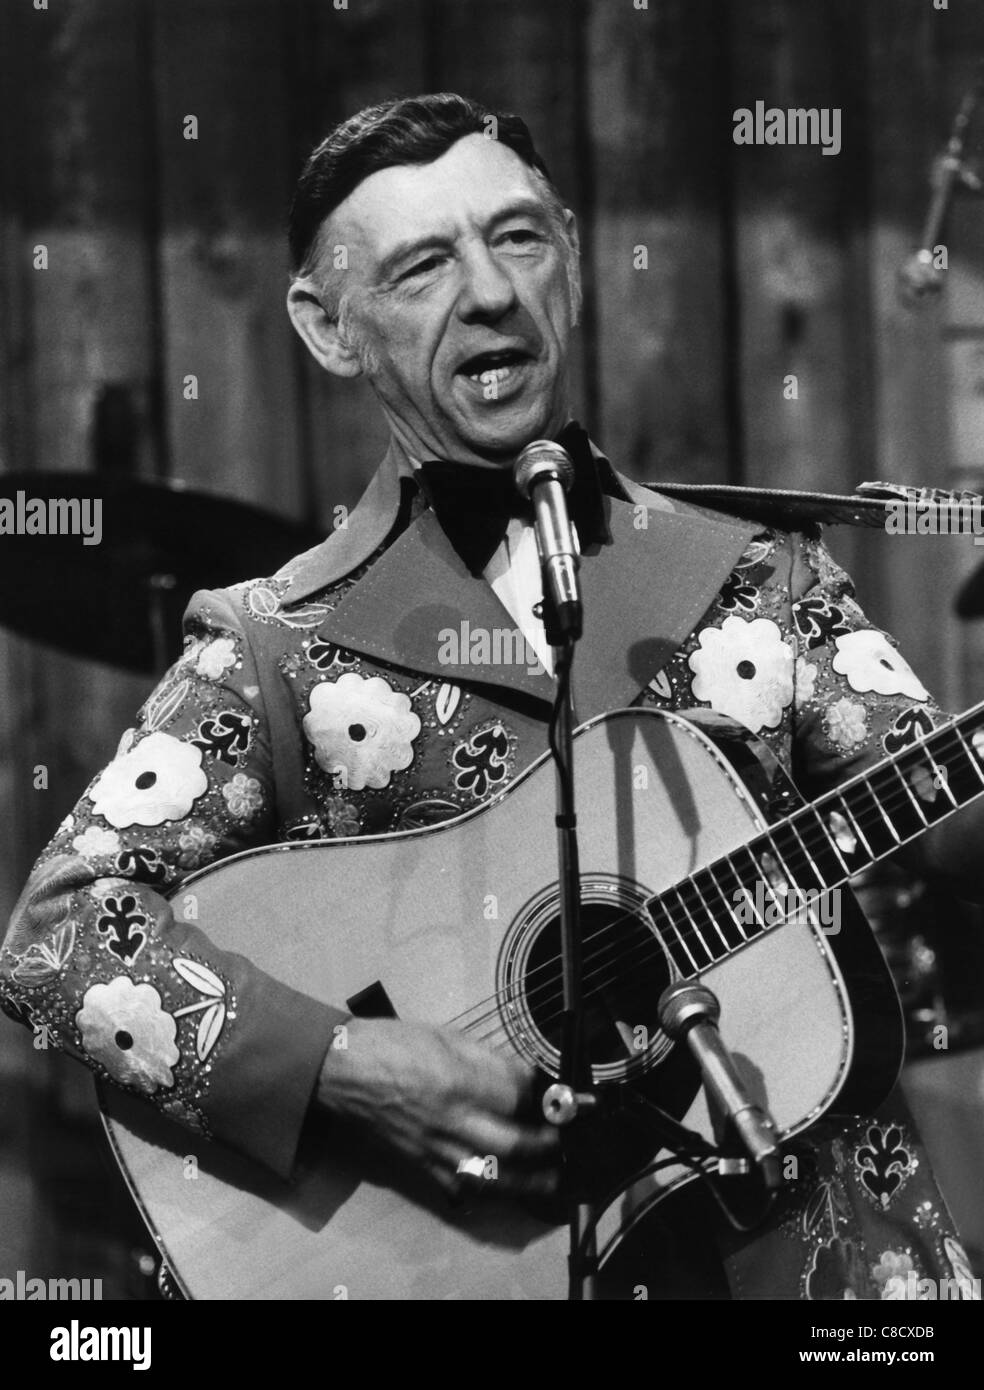 HANK SNOW COUNTRY MUSIC SINGER SONGWRITER (1964) Stock Photo